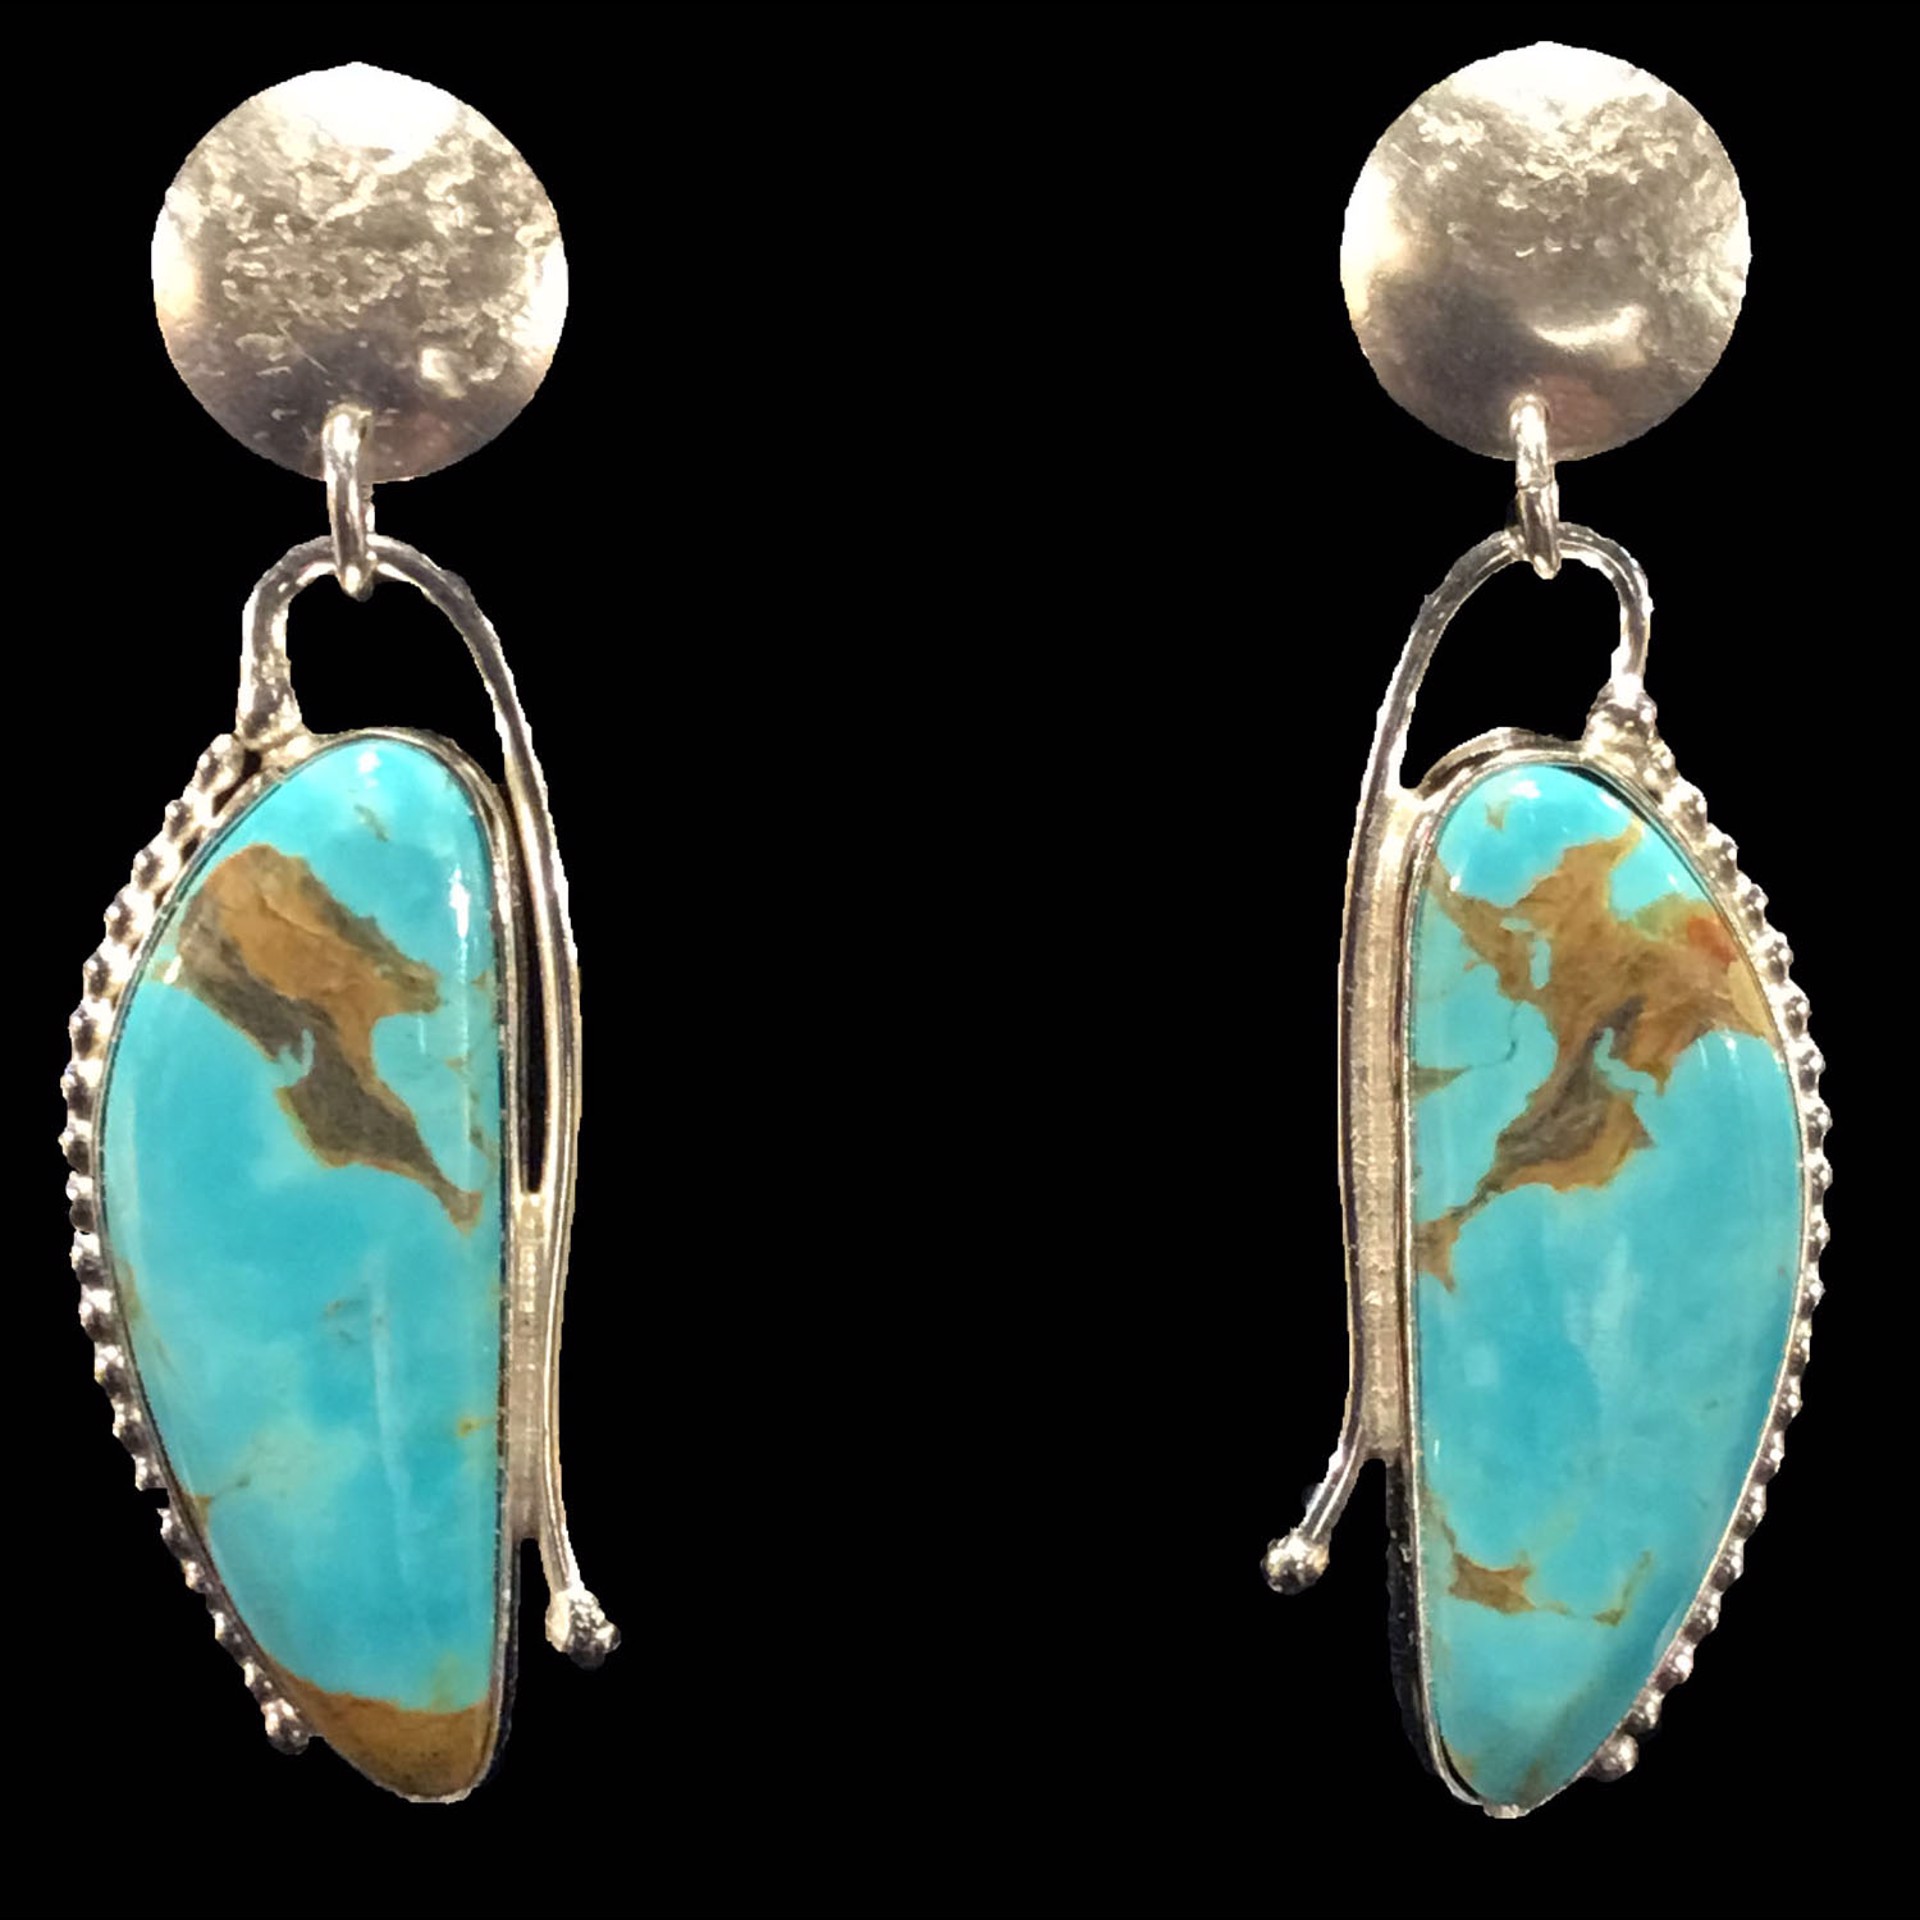 Wide Crecent Turquoise Earrings by Michael Redhawk